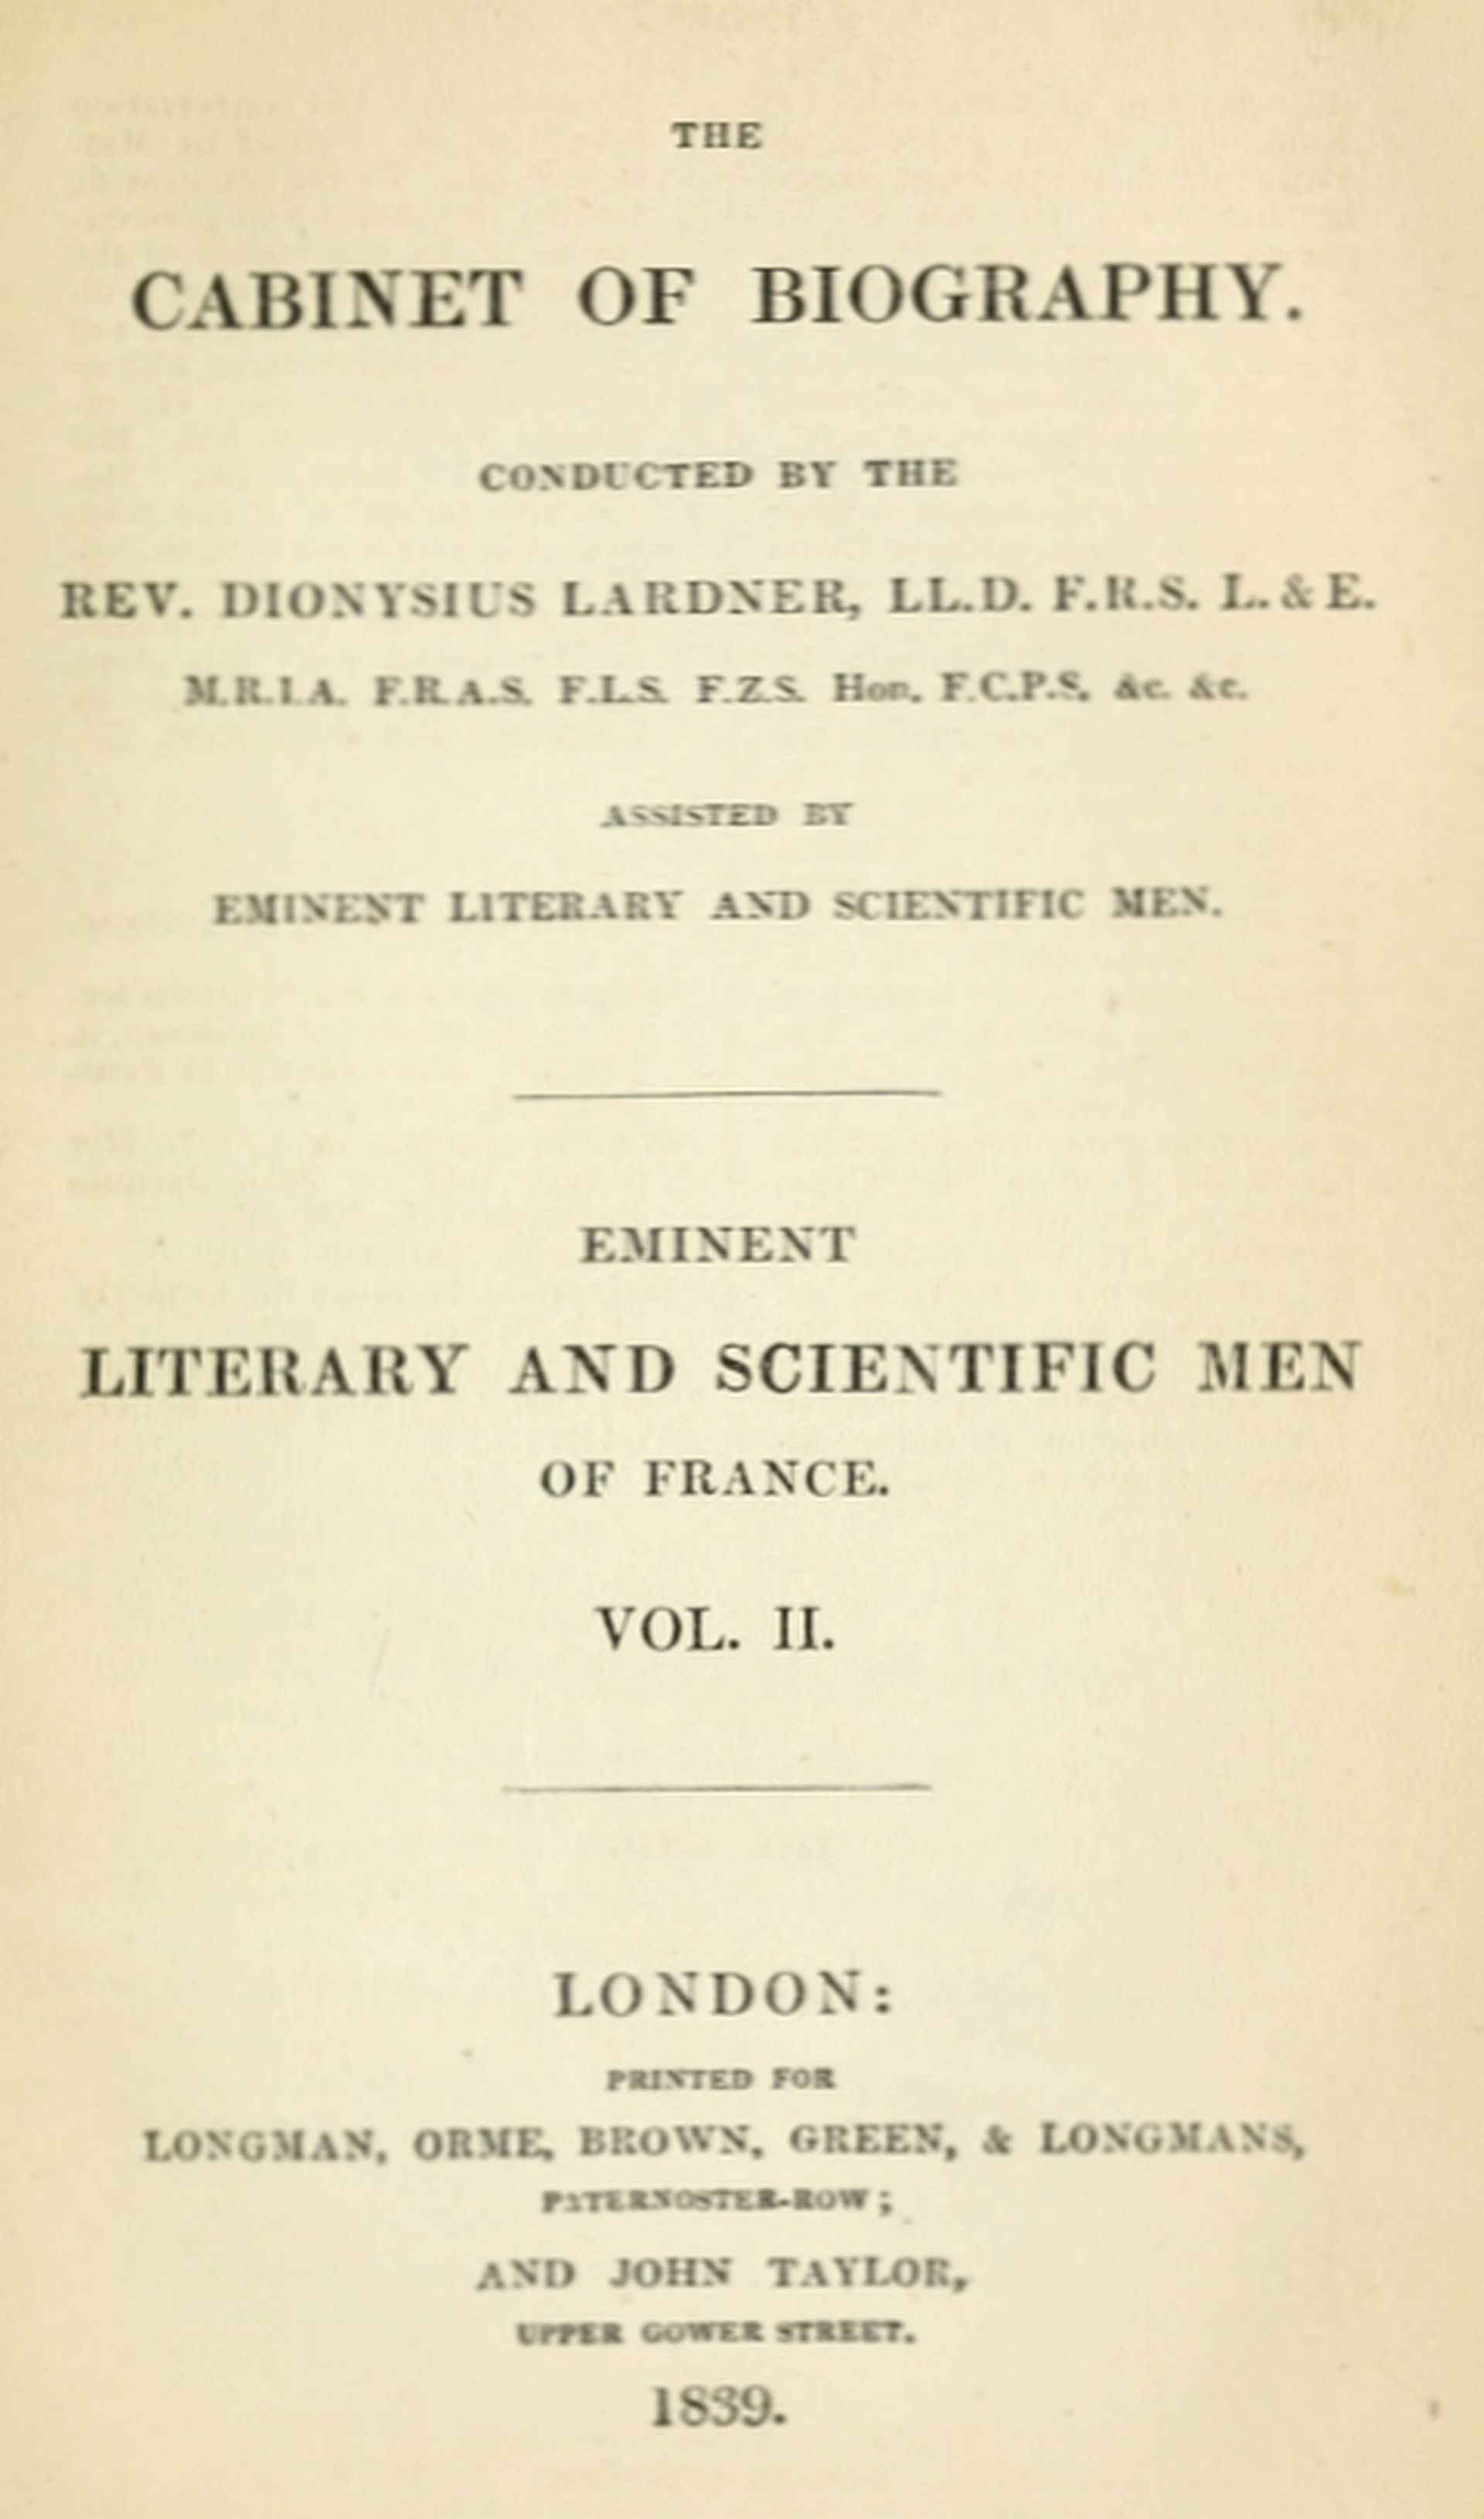 The Project Gutenberg eBook of Eminent literary and scientific men of France, image